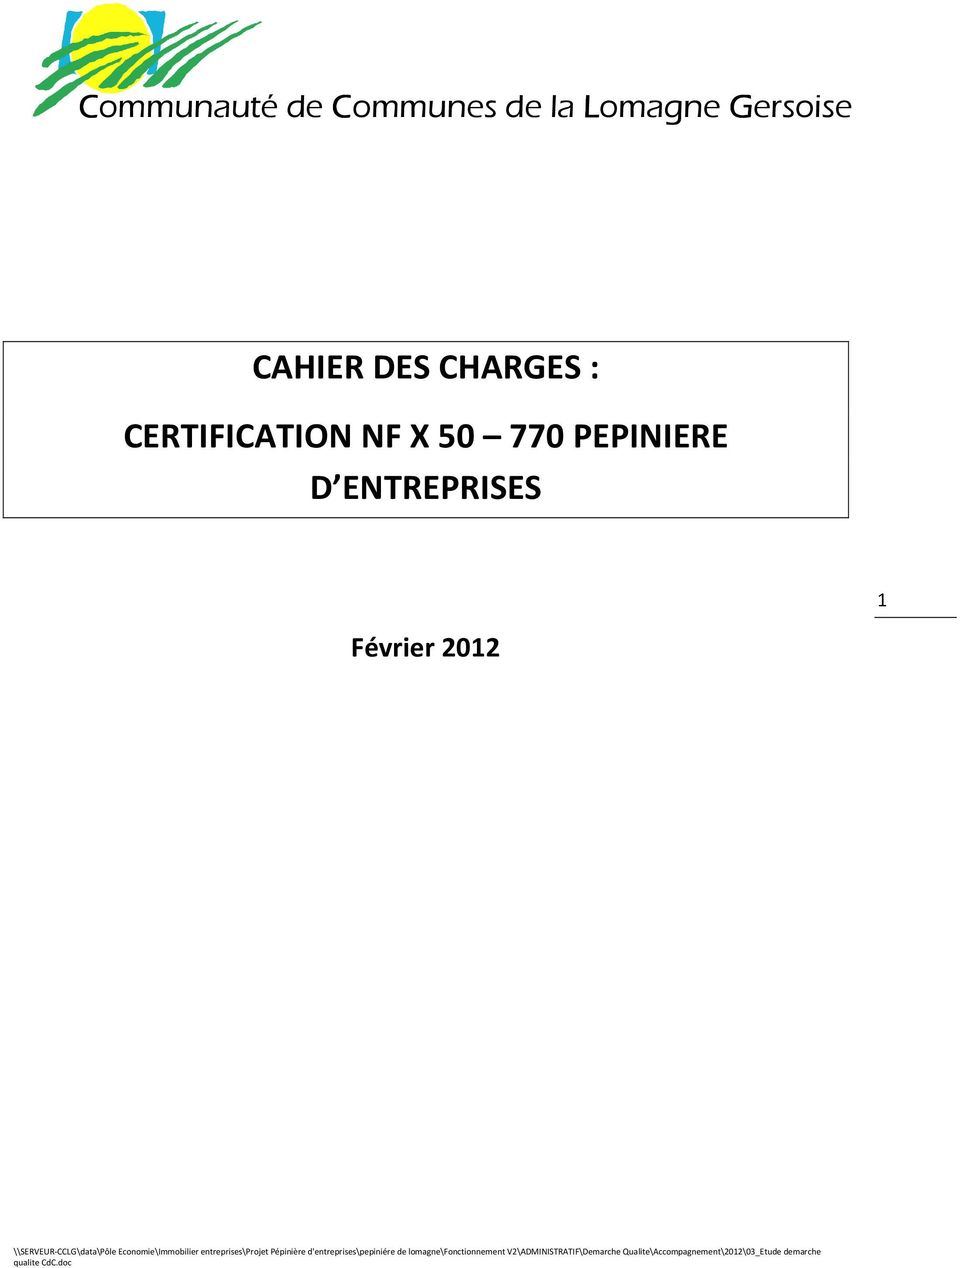 CHARGES : CERTIFICATION NF X 50